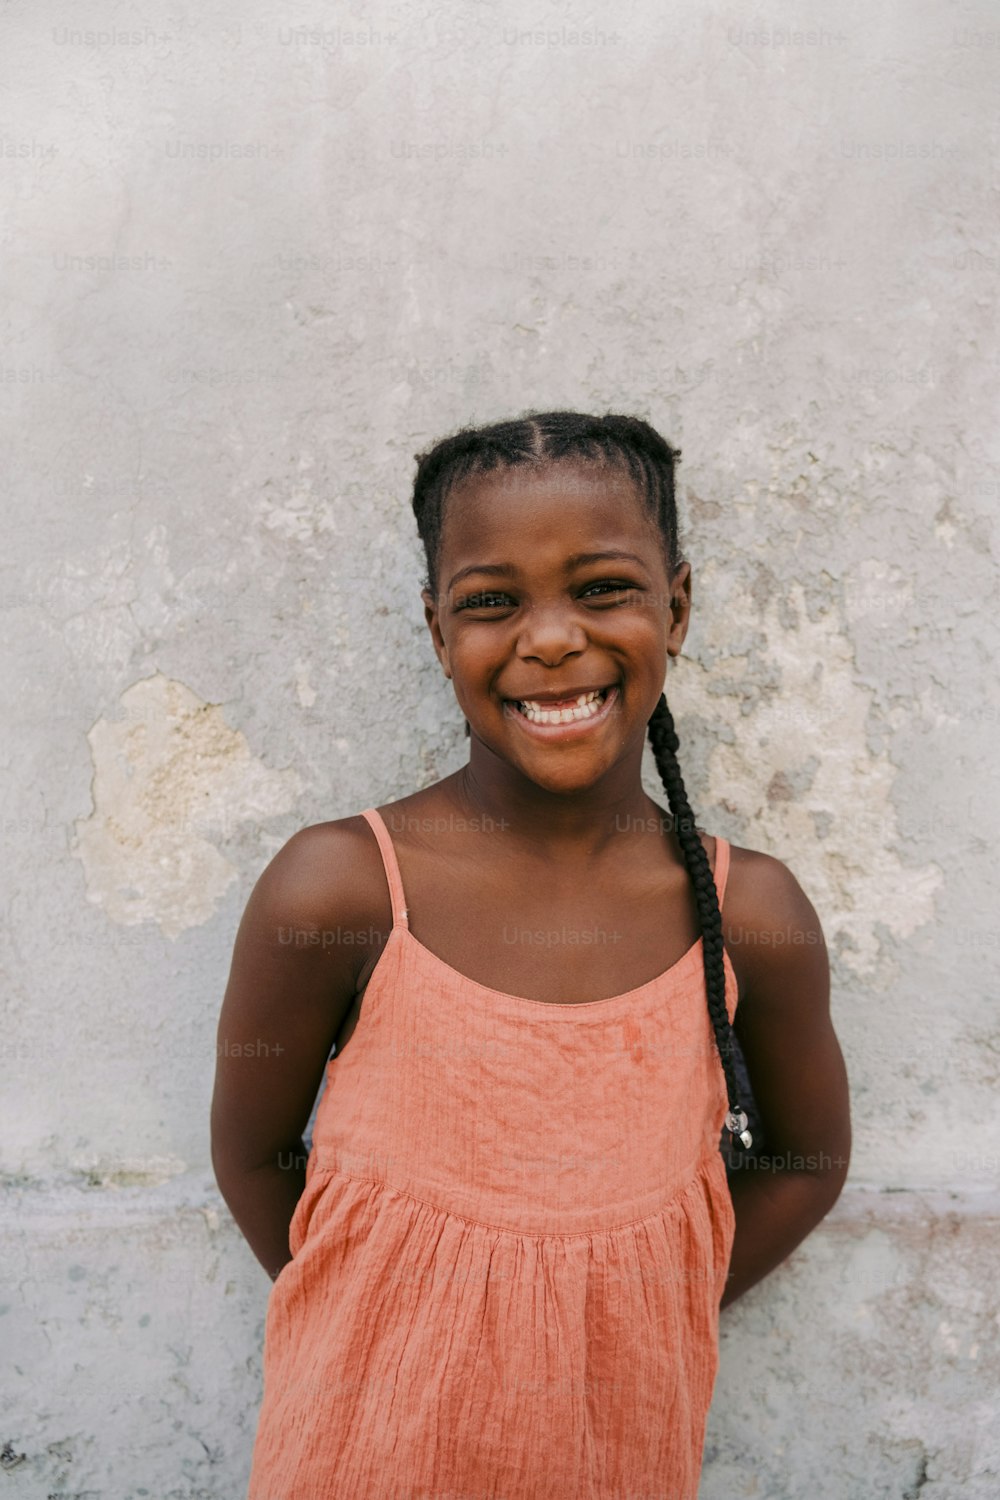 a smiling young girl with braids standing in front of a wall